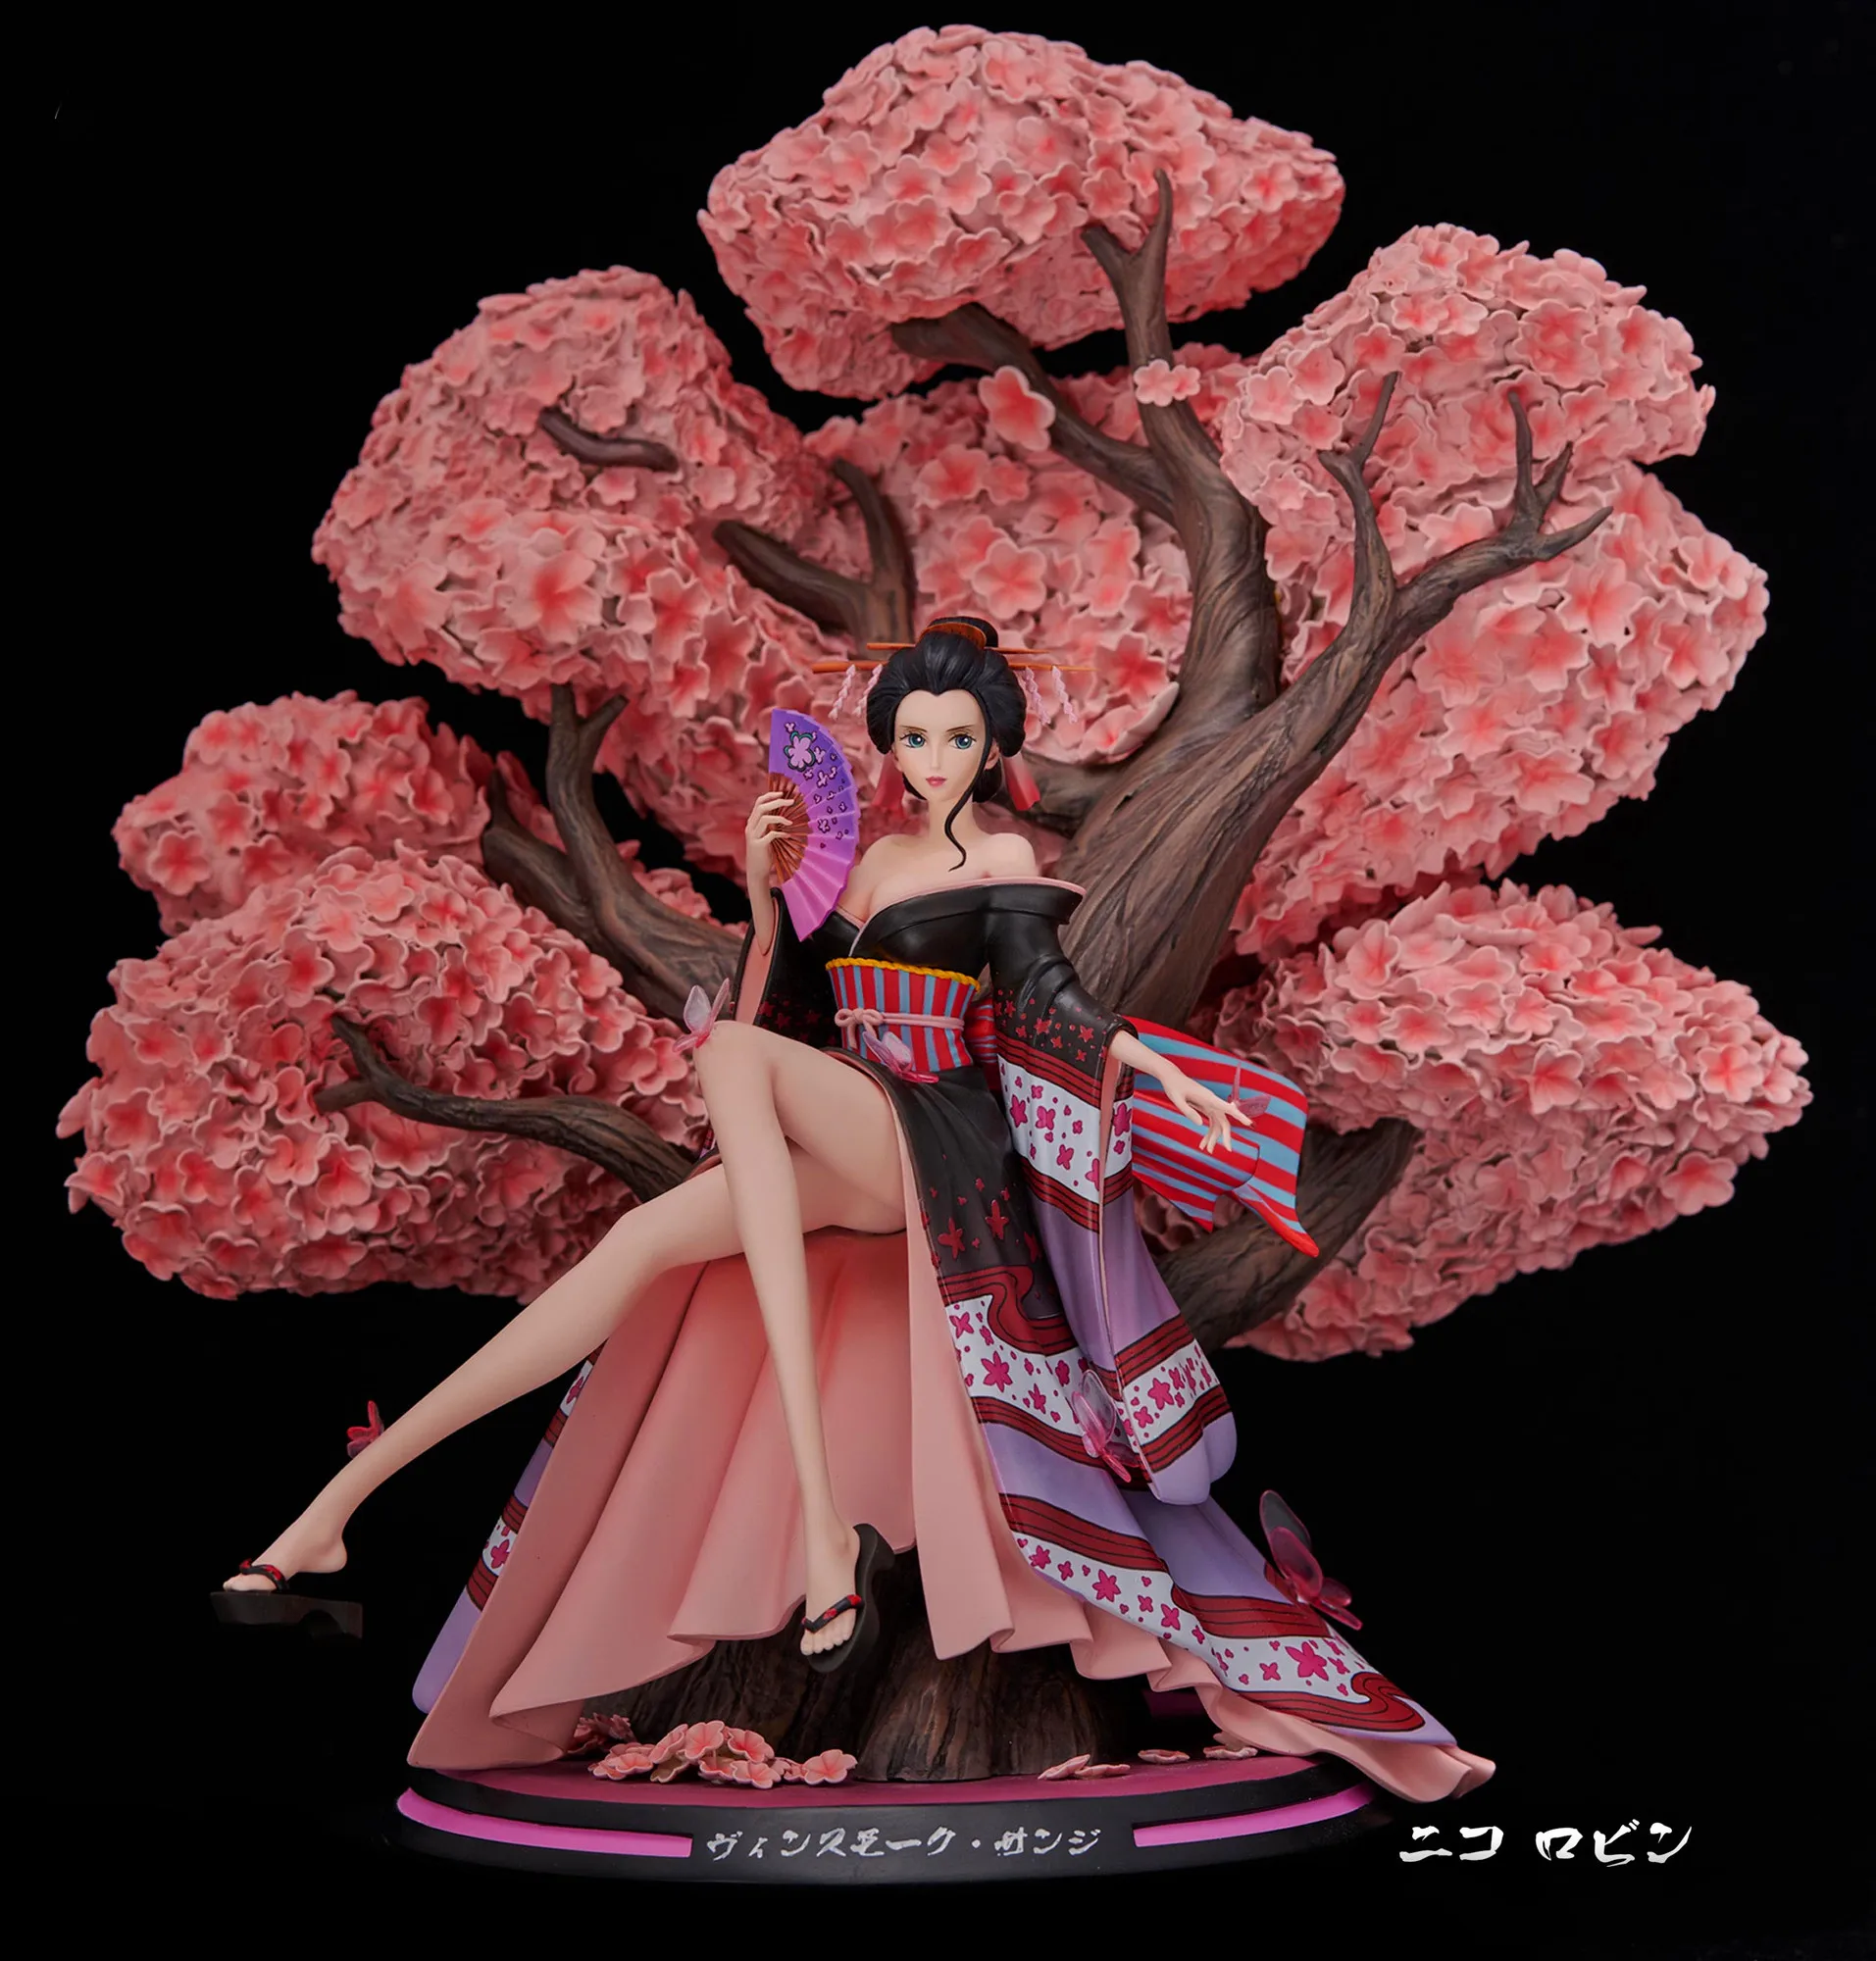 One Piece Gk Re Nico Robin 1 7 Action Figure For Collection Buy Miss Allsunday Action Figure One Piece Action Figure Product On Alibaba Com